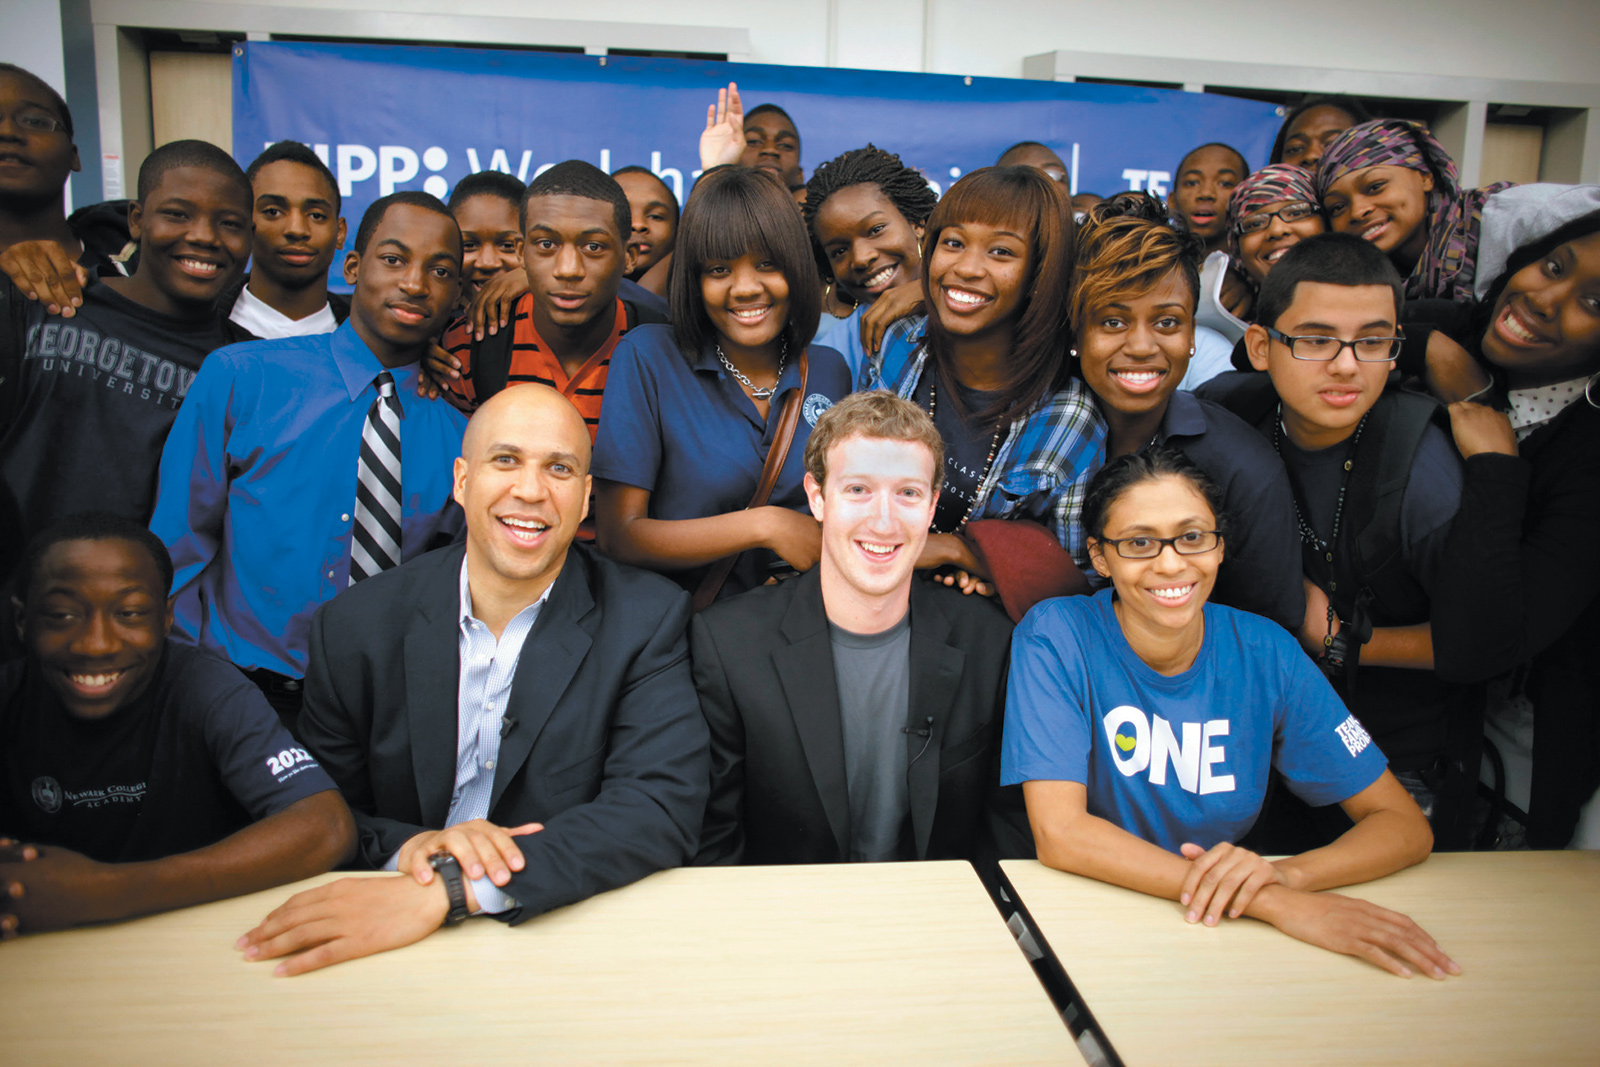 Cory Booker, then mayor of Newark, and Facebook CEO Mark Zuckerberg with eleventh-grade math students at the KIPP Newark Collegiate Academy, a charter school, September 2010